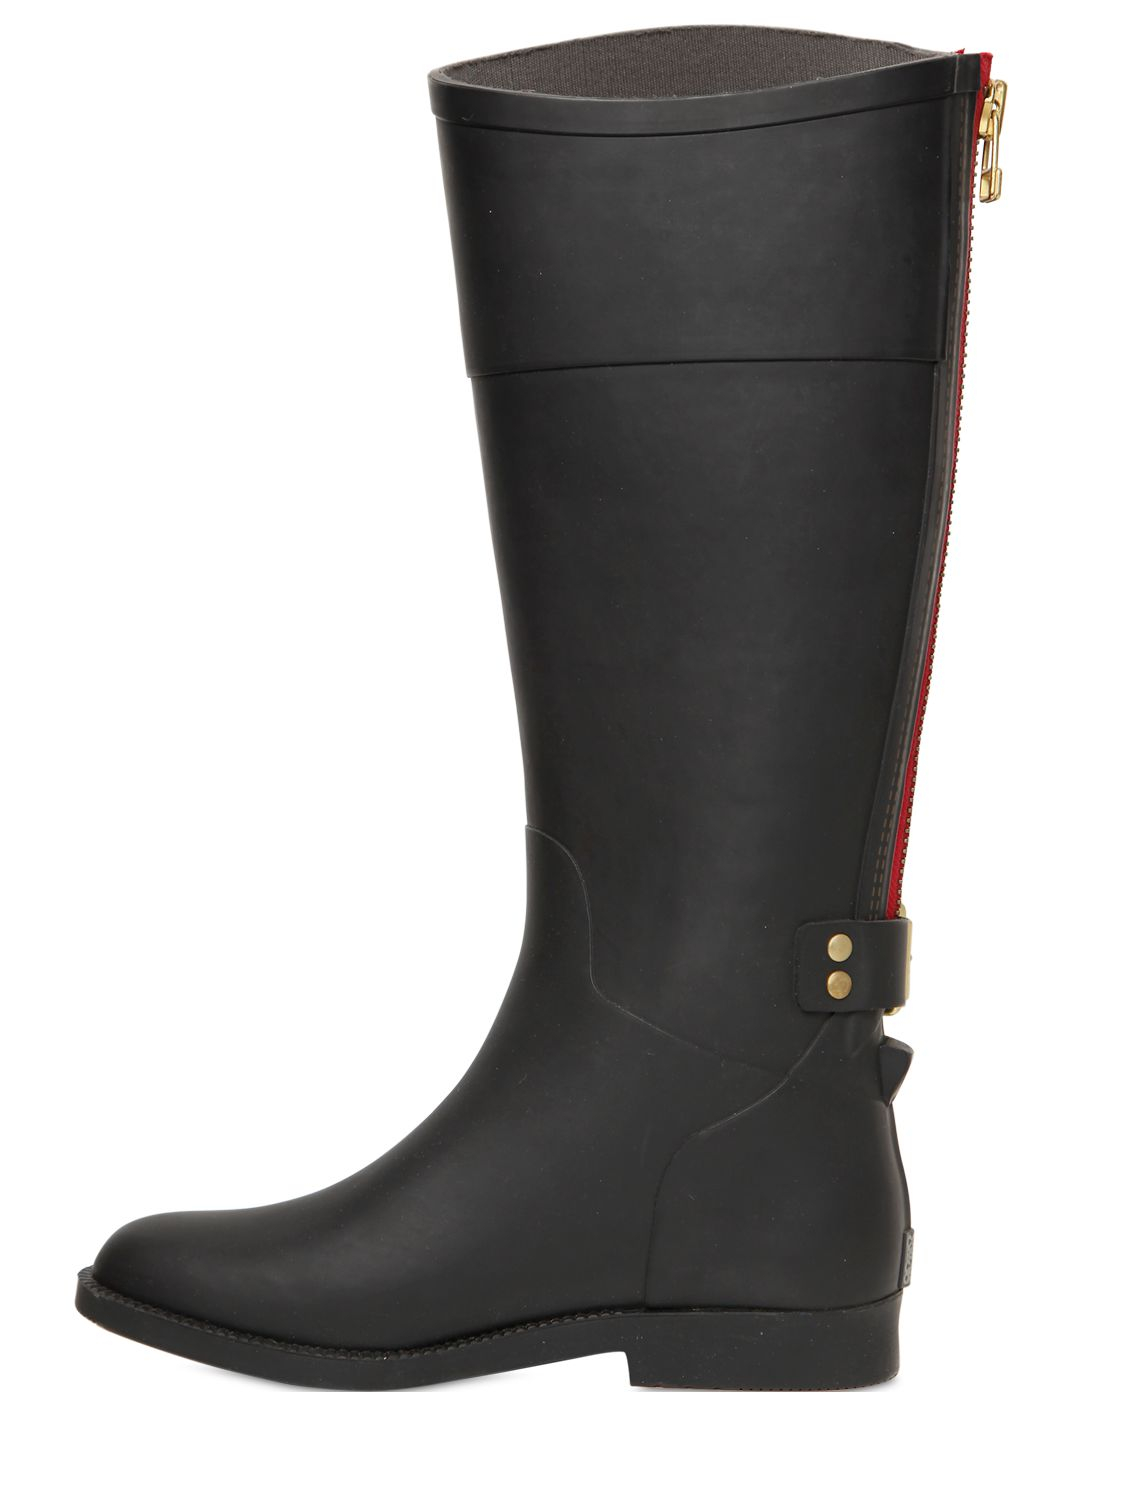 Lyst - Colors Of California 20mm Natural Rubber Riding Boots in Black